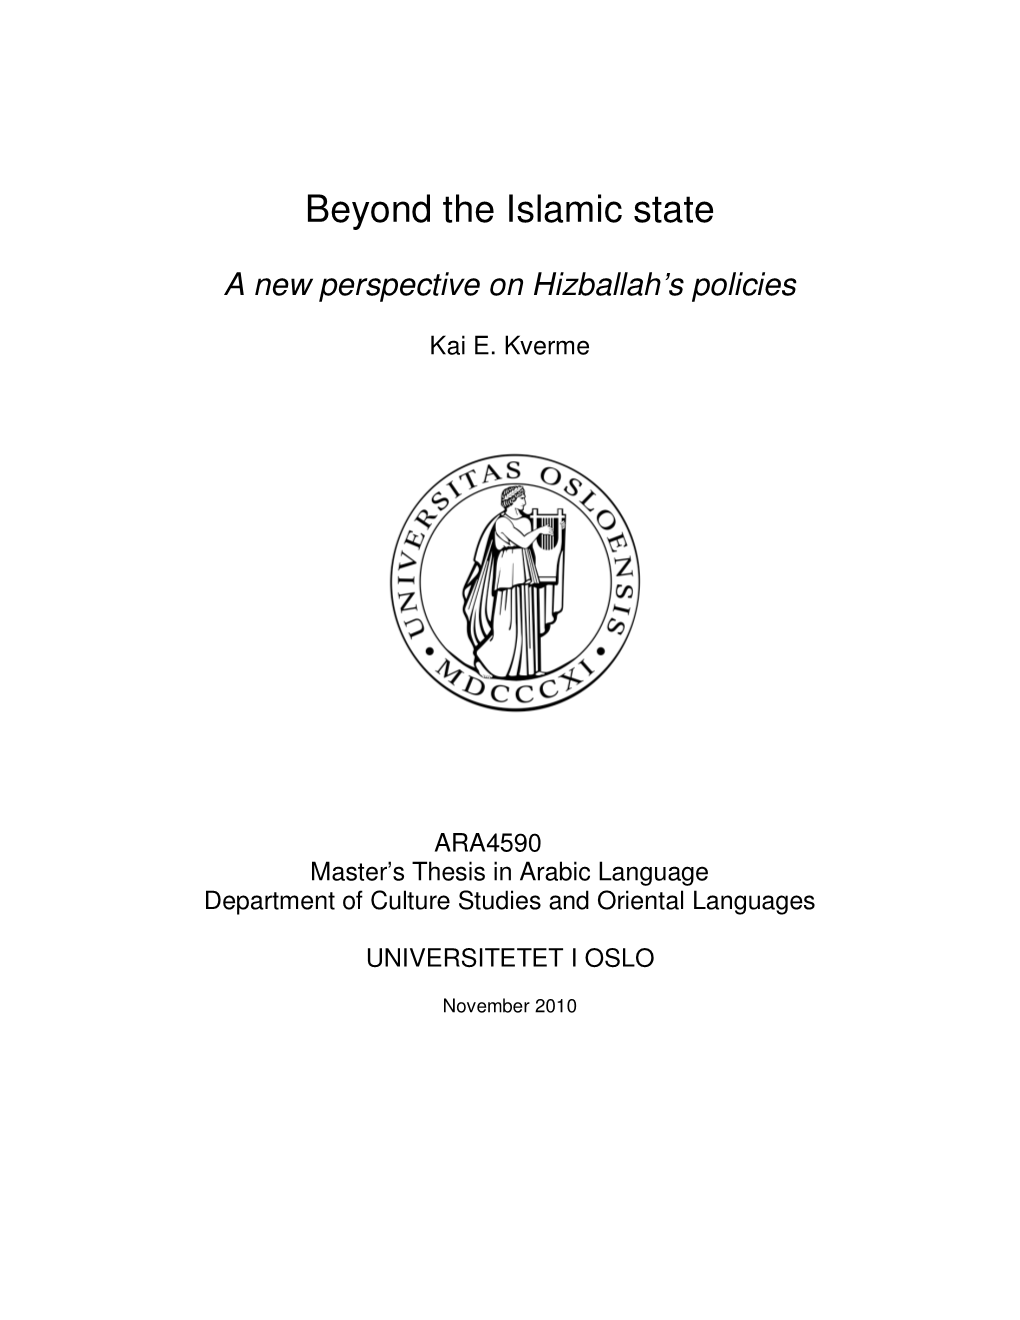 Beyond the Islamic State